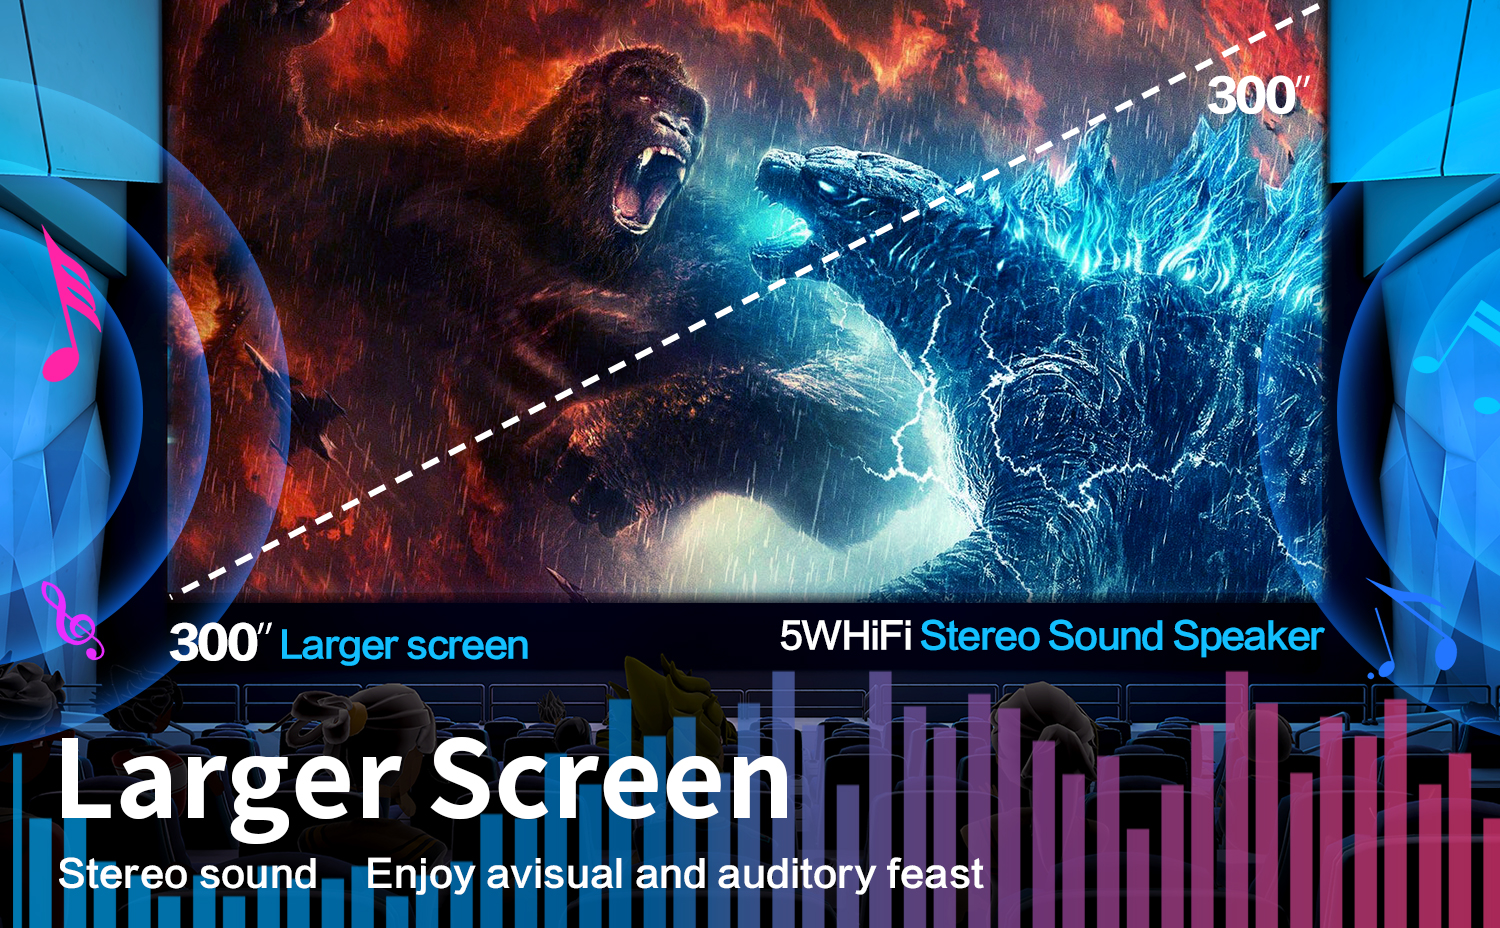 LARGER SCREEN STEREO SOUND Projector